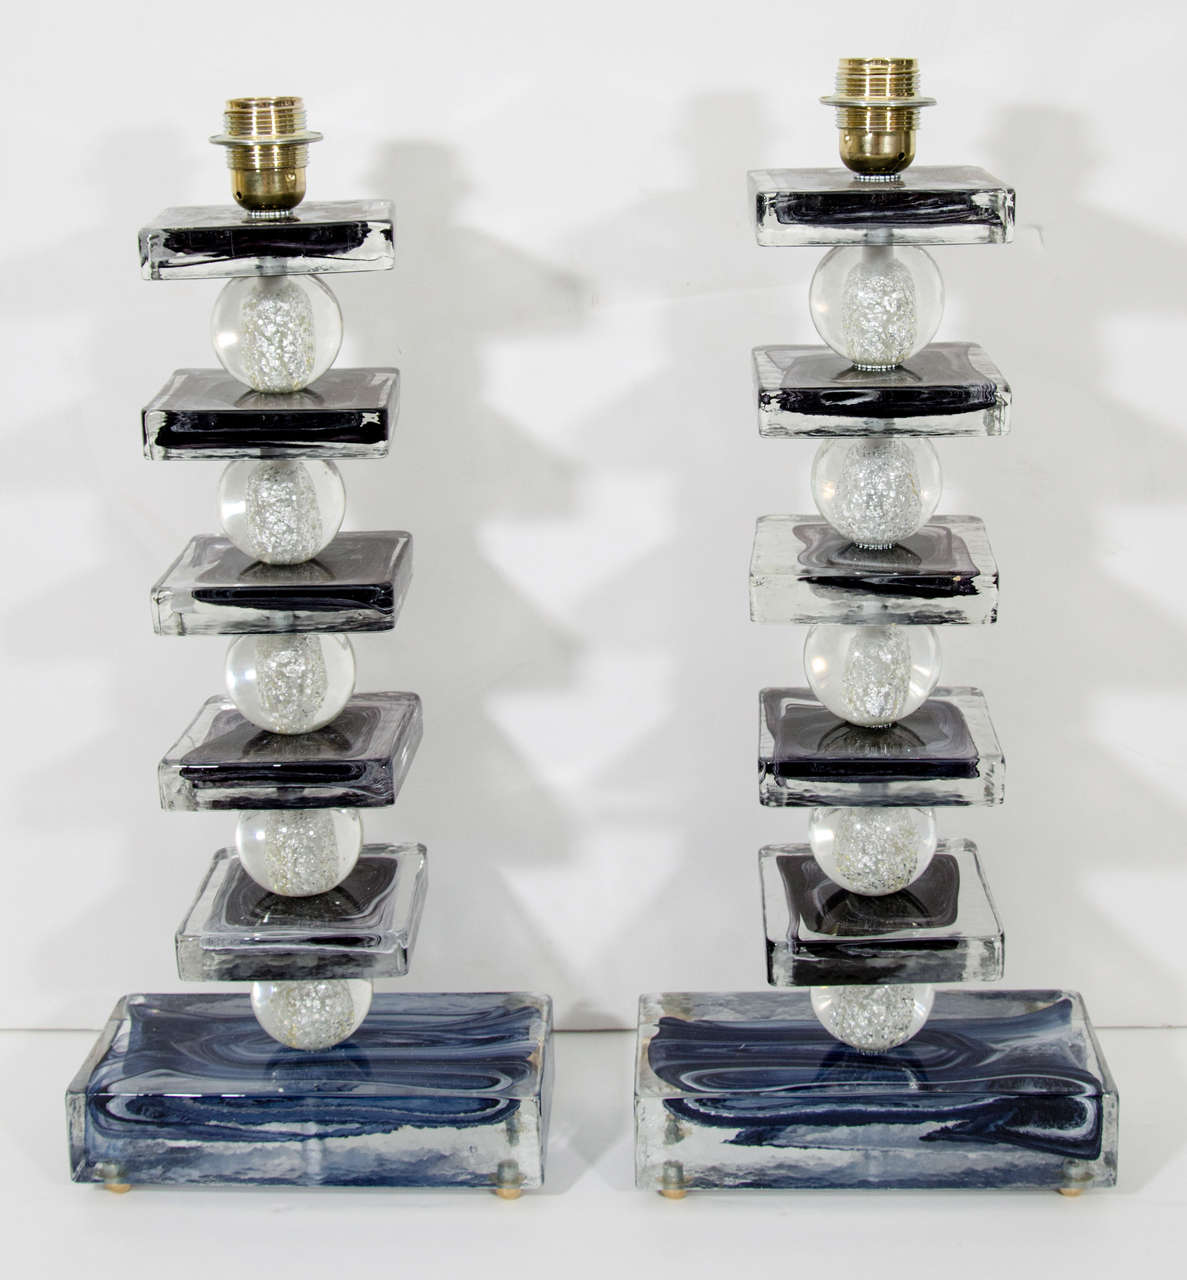 A most unusual pair of Murano glass column lamps composed of midnight blue over white glass cubes and round clear glass globes with silver leaf inclusions. These one of a kind lamps that are truly works of art. The height listed is to the top of the